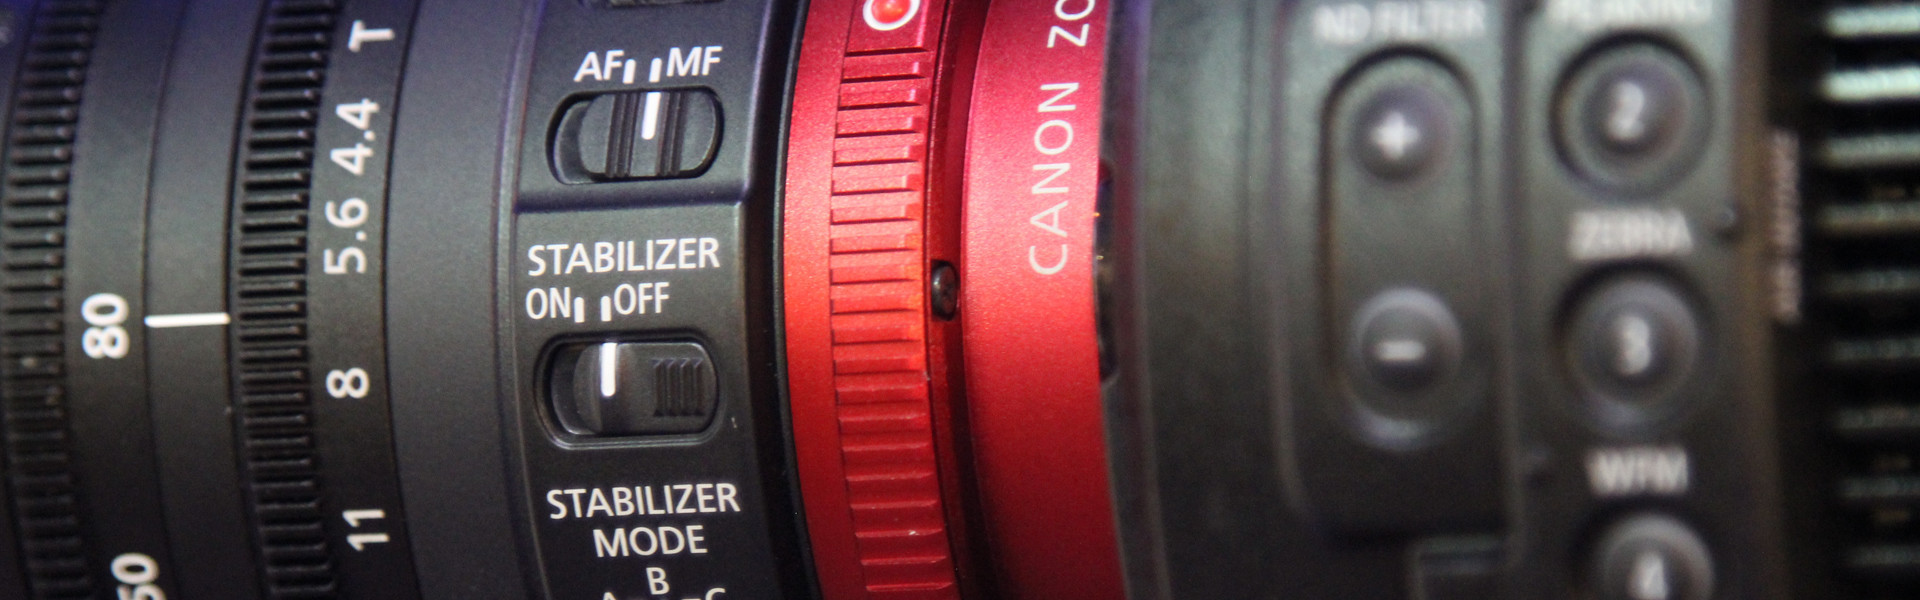 Header image for article Canon Announces New EOS C100 Mark II